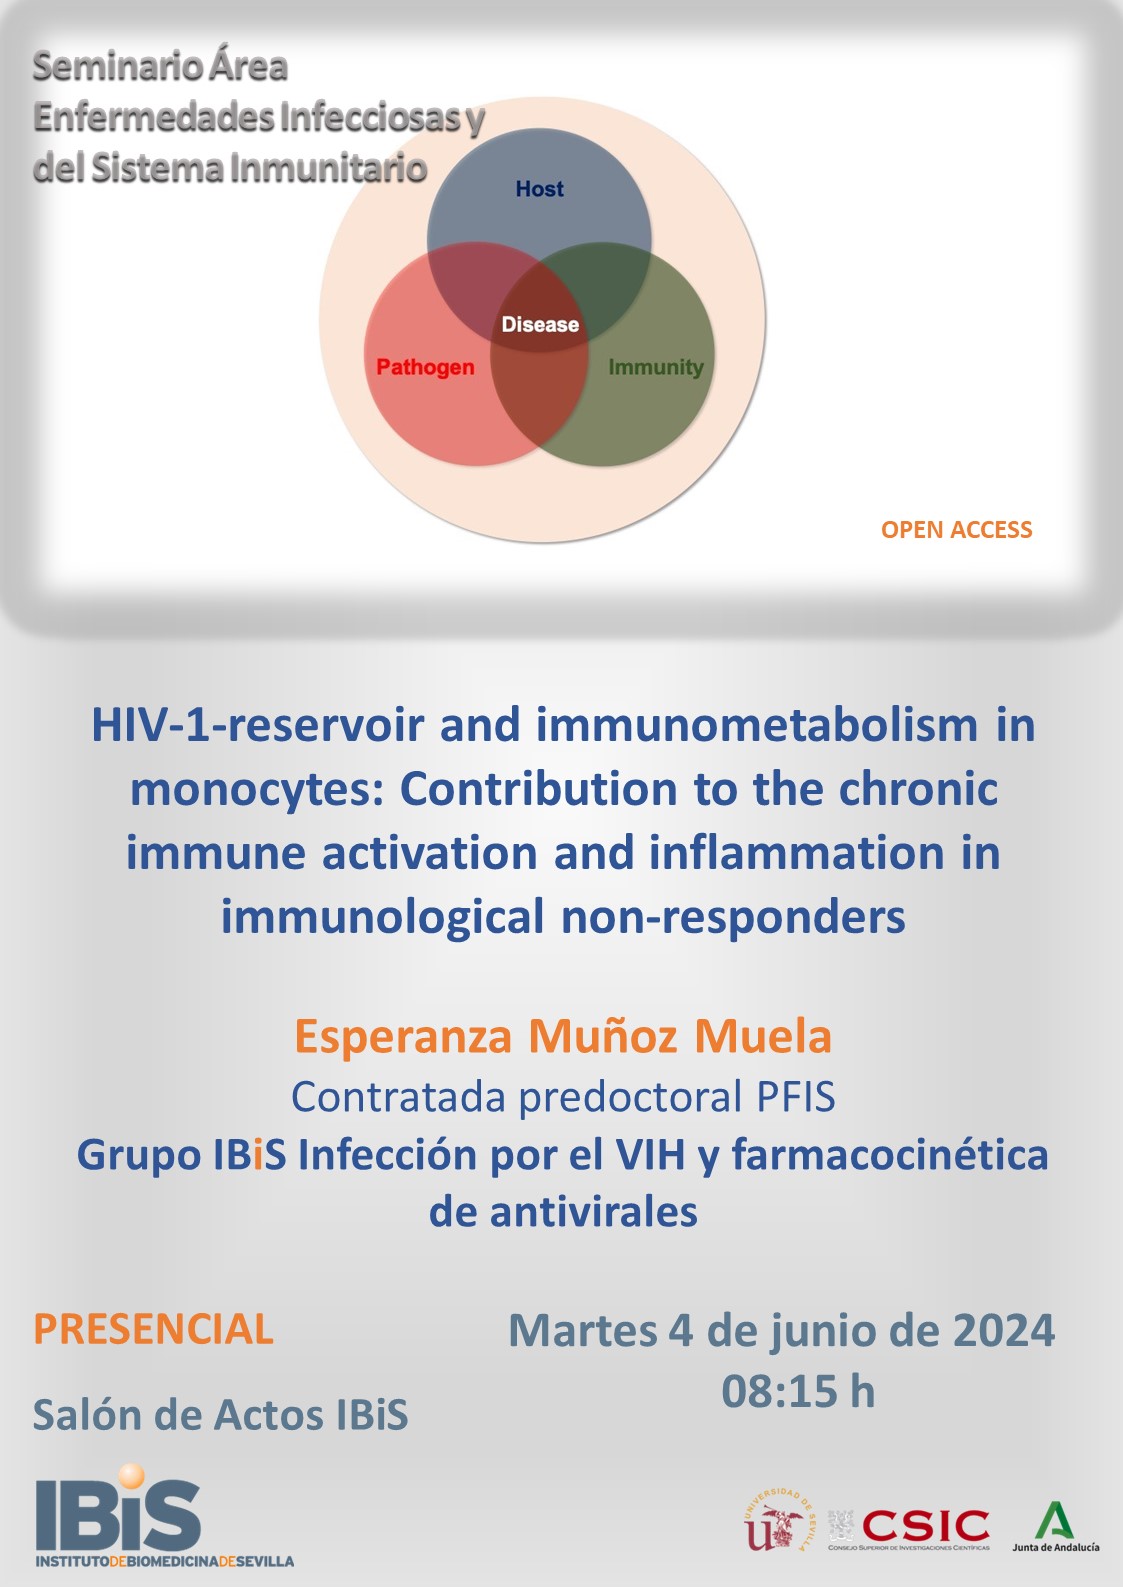 Poster: HIV-1-reservoir and immunometabolism in monocytes: Contribution to the chronic immune activation and inflammation in immunological non-responders